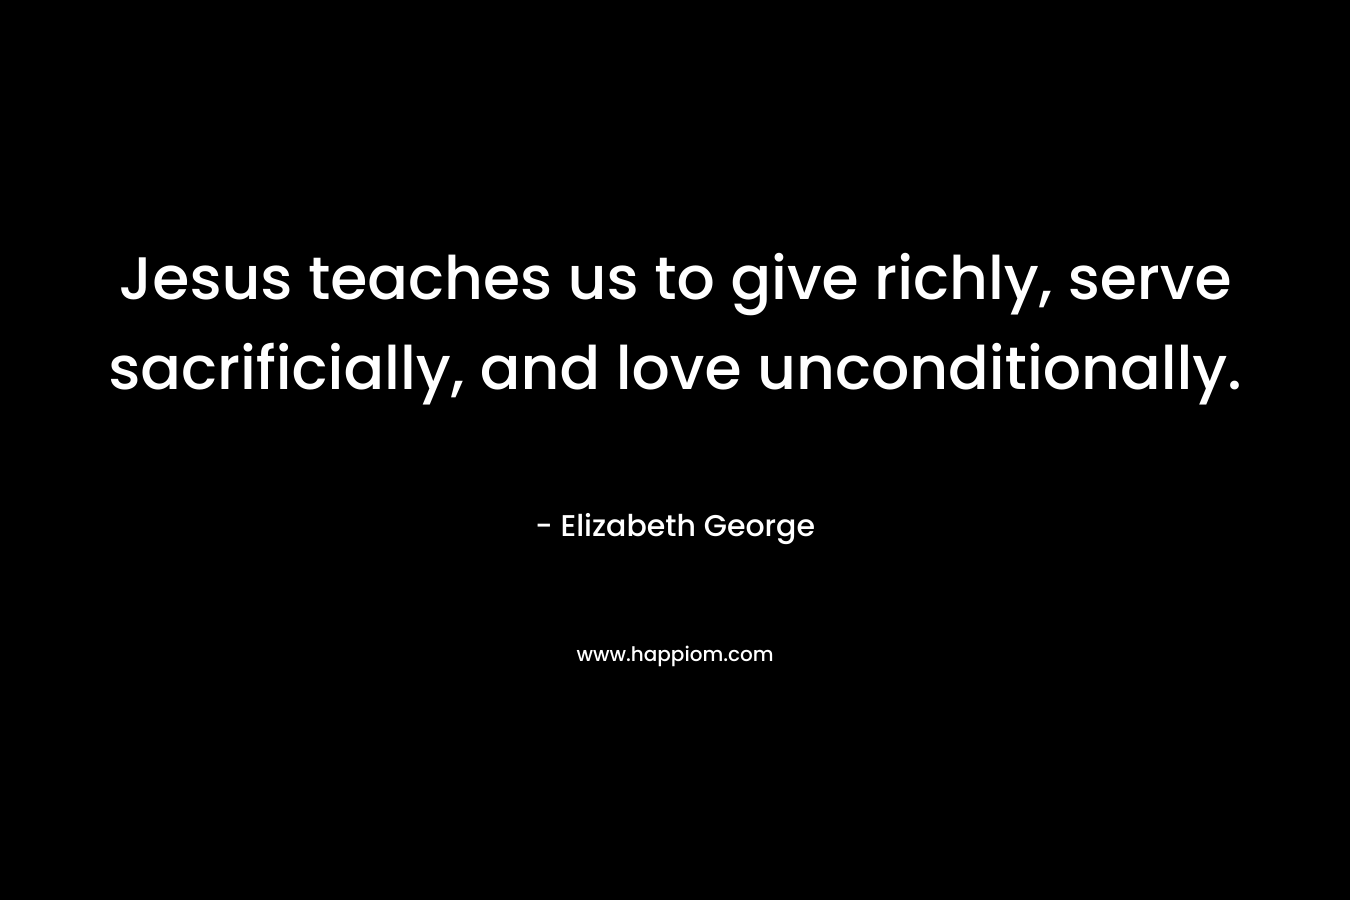 Jesus teaches us to give richly, serve sacrificially, and love unconditionally.